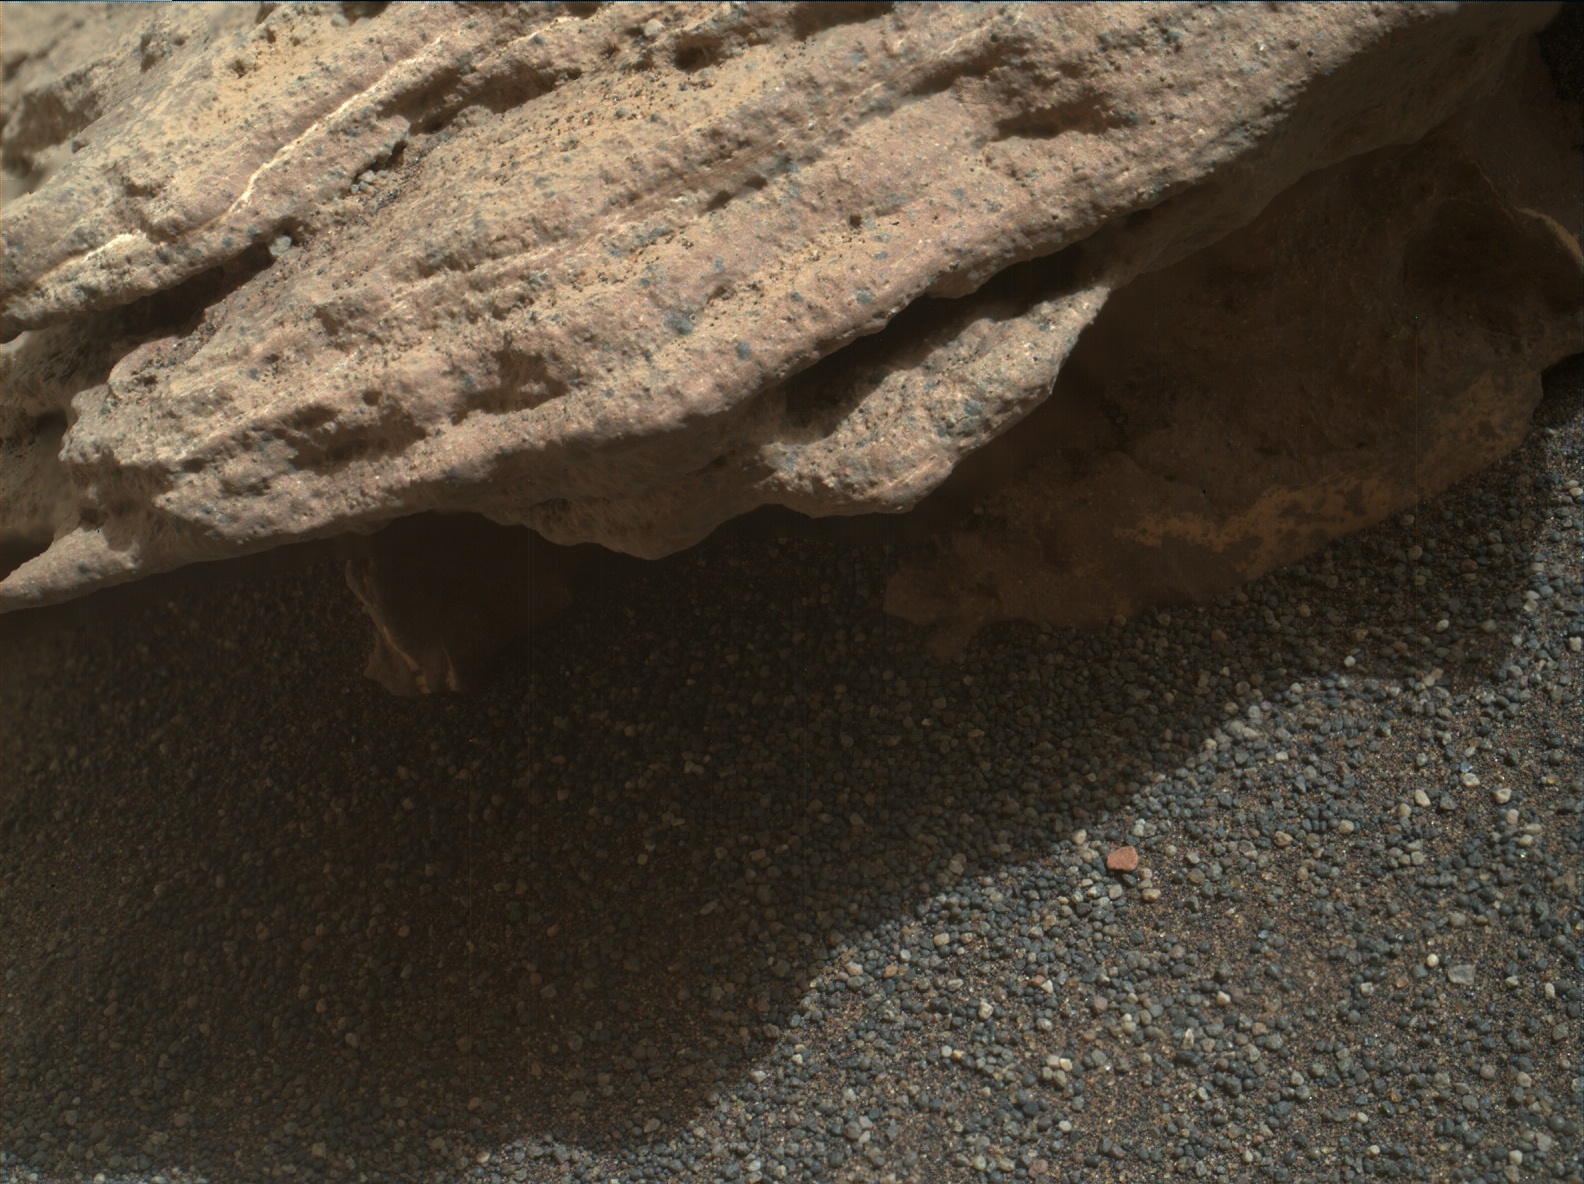 Nasa's Mars rover Curiosity acquired this image using its Mars Hand Lens Imager (MAHLI) on Sol 1523